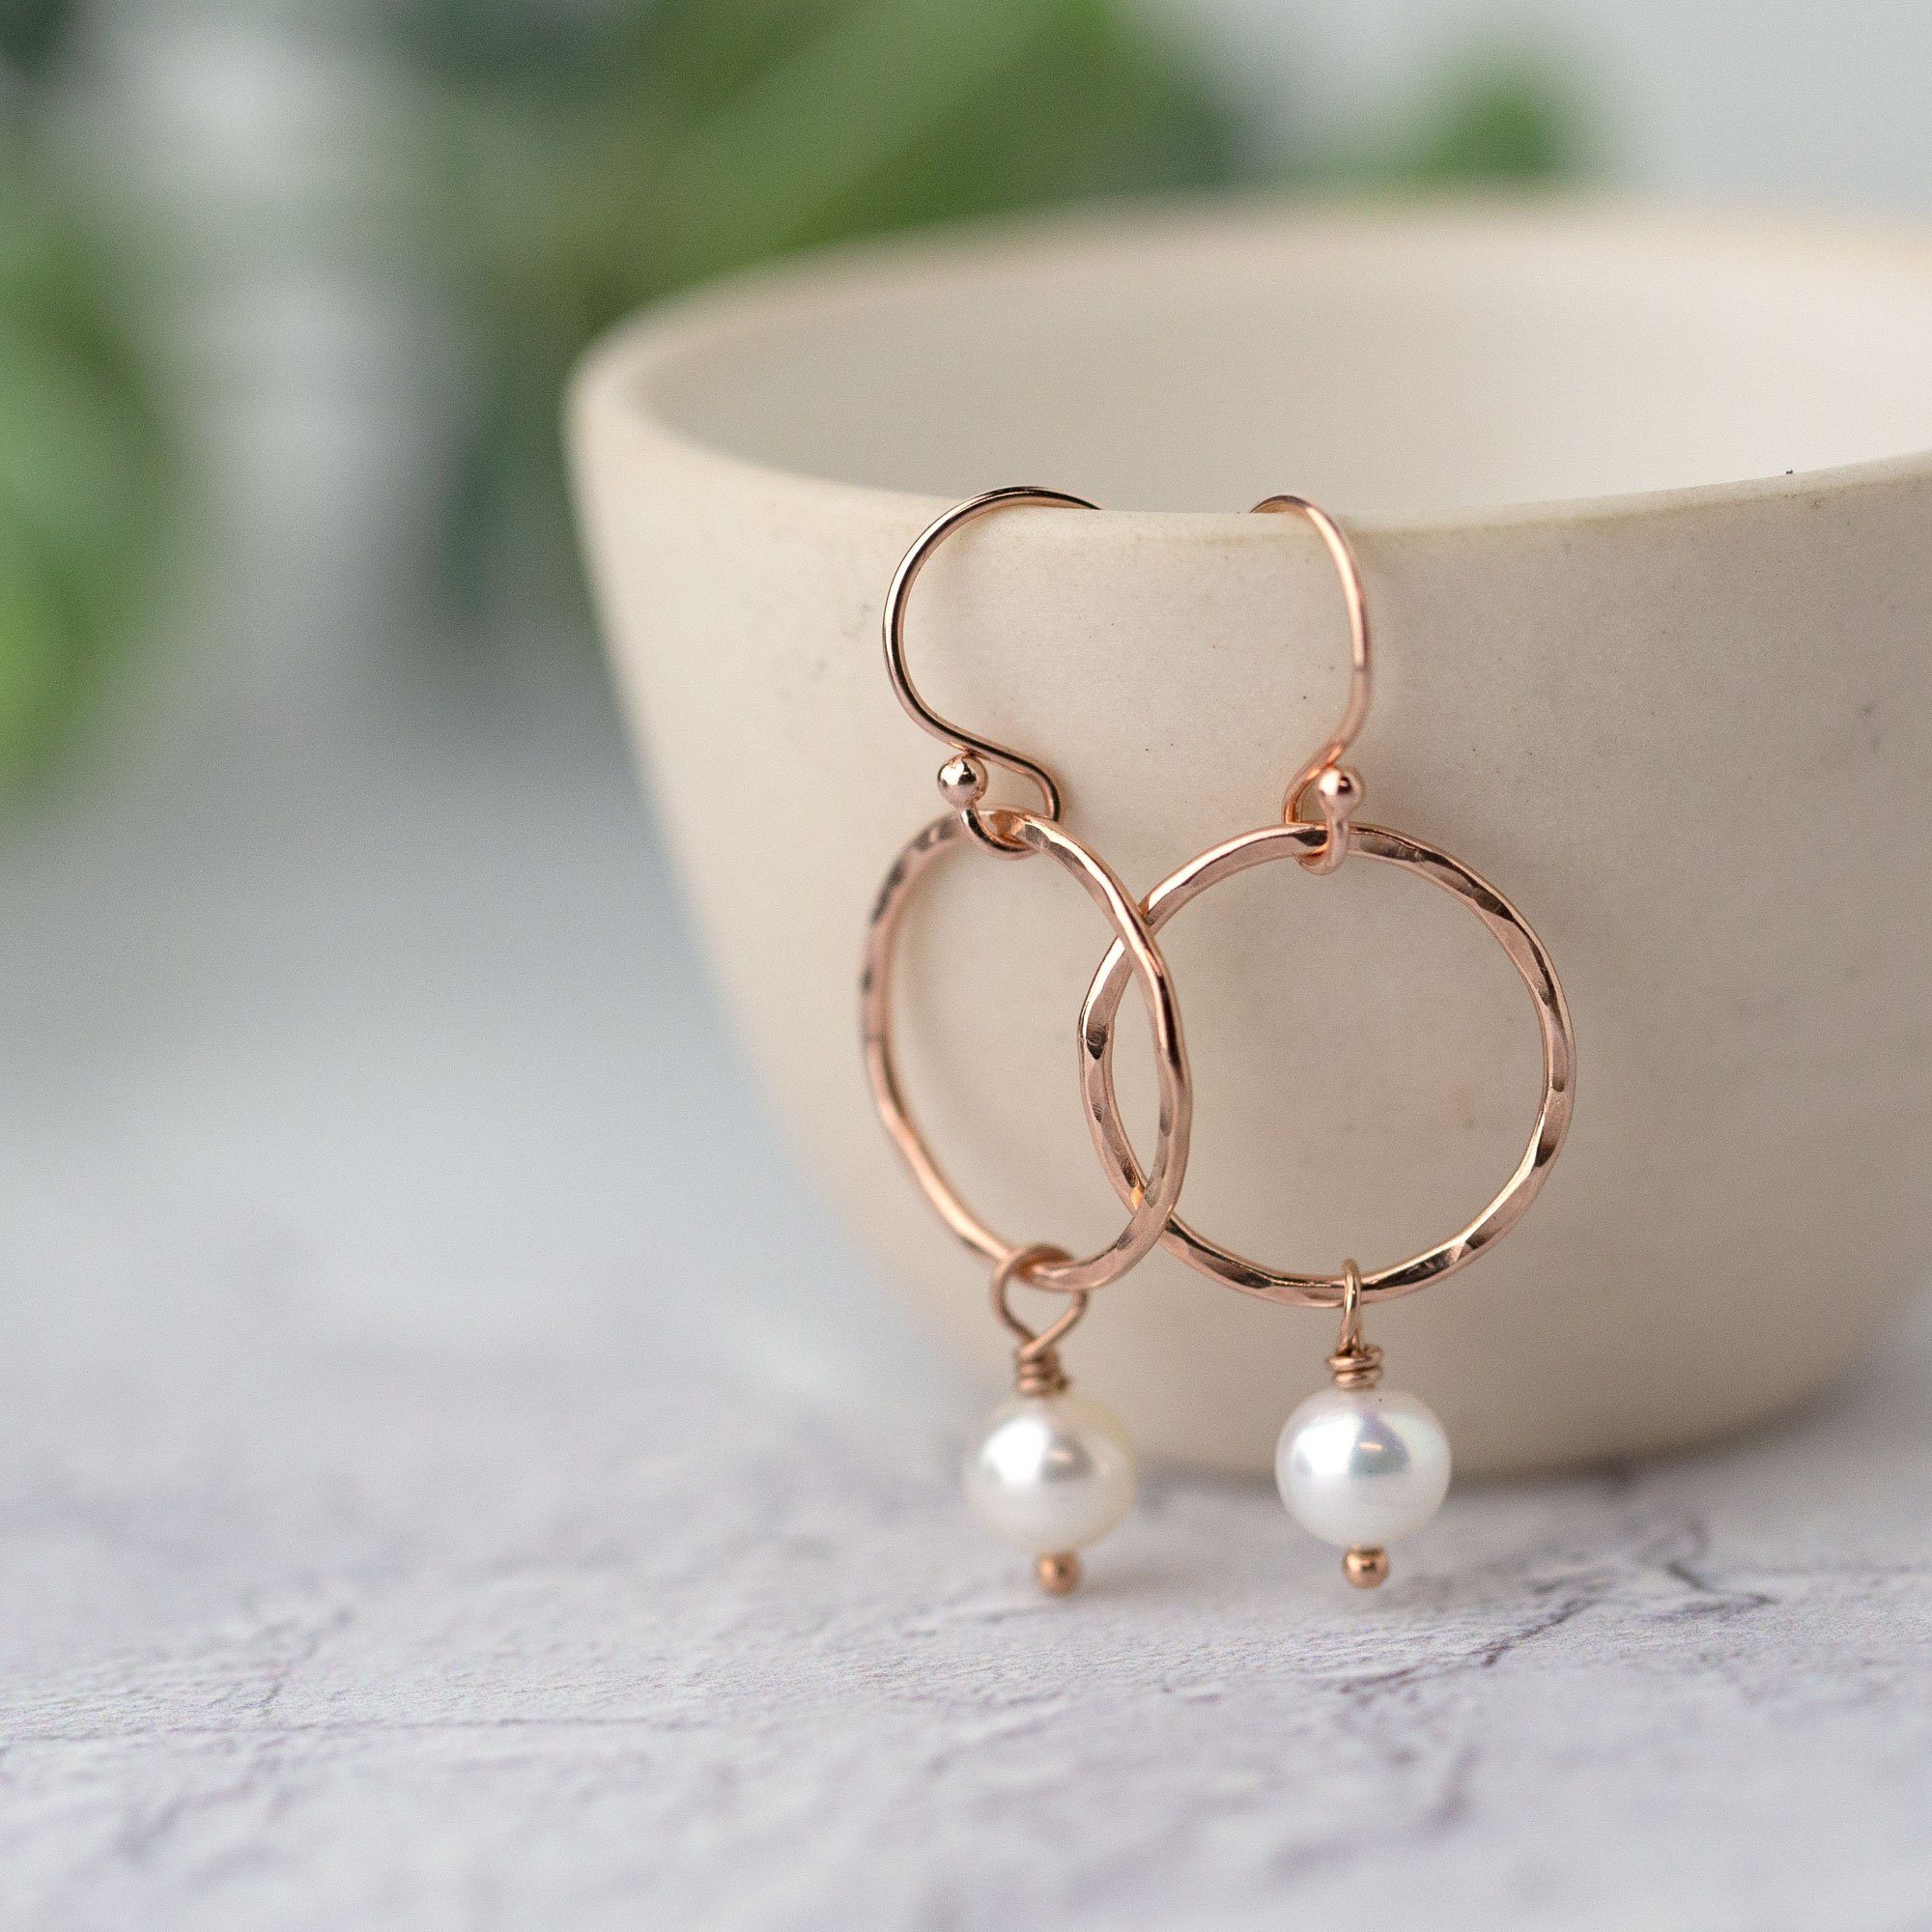 Rose Gold Circle Pearl Earrings - Handmade Jewelry by Burnish